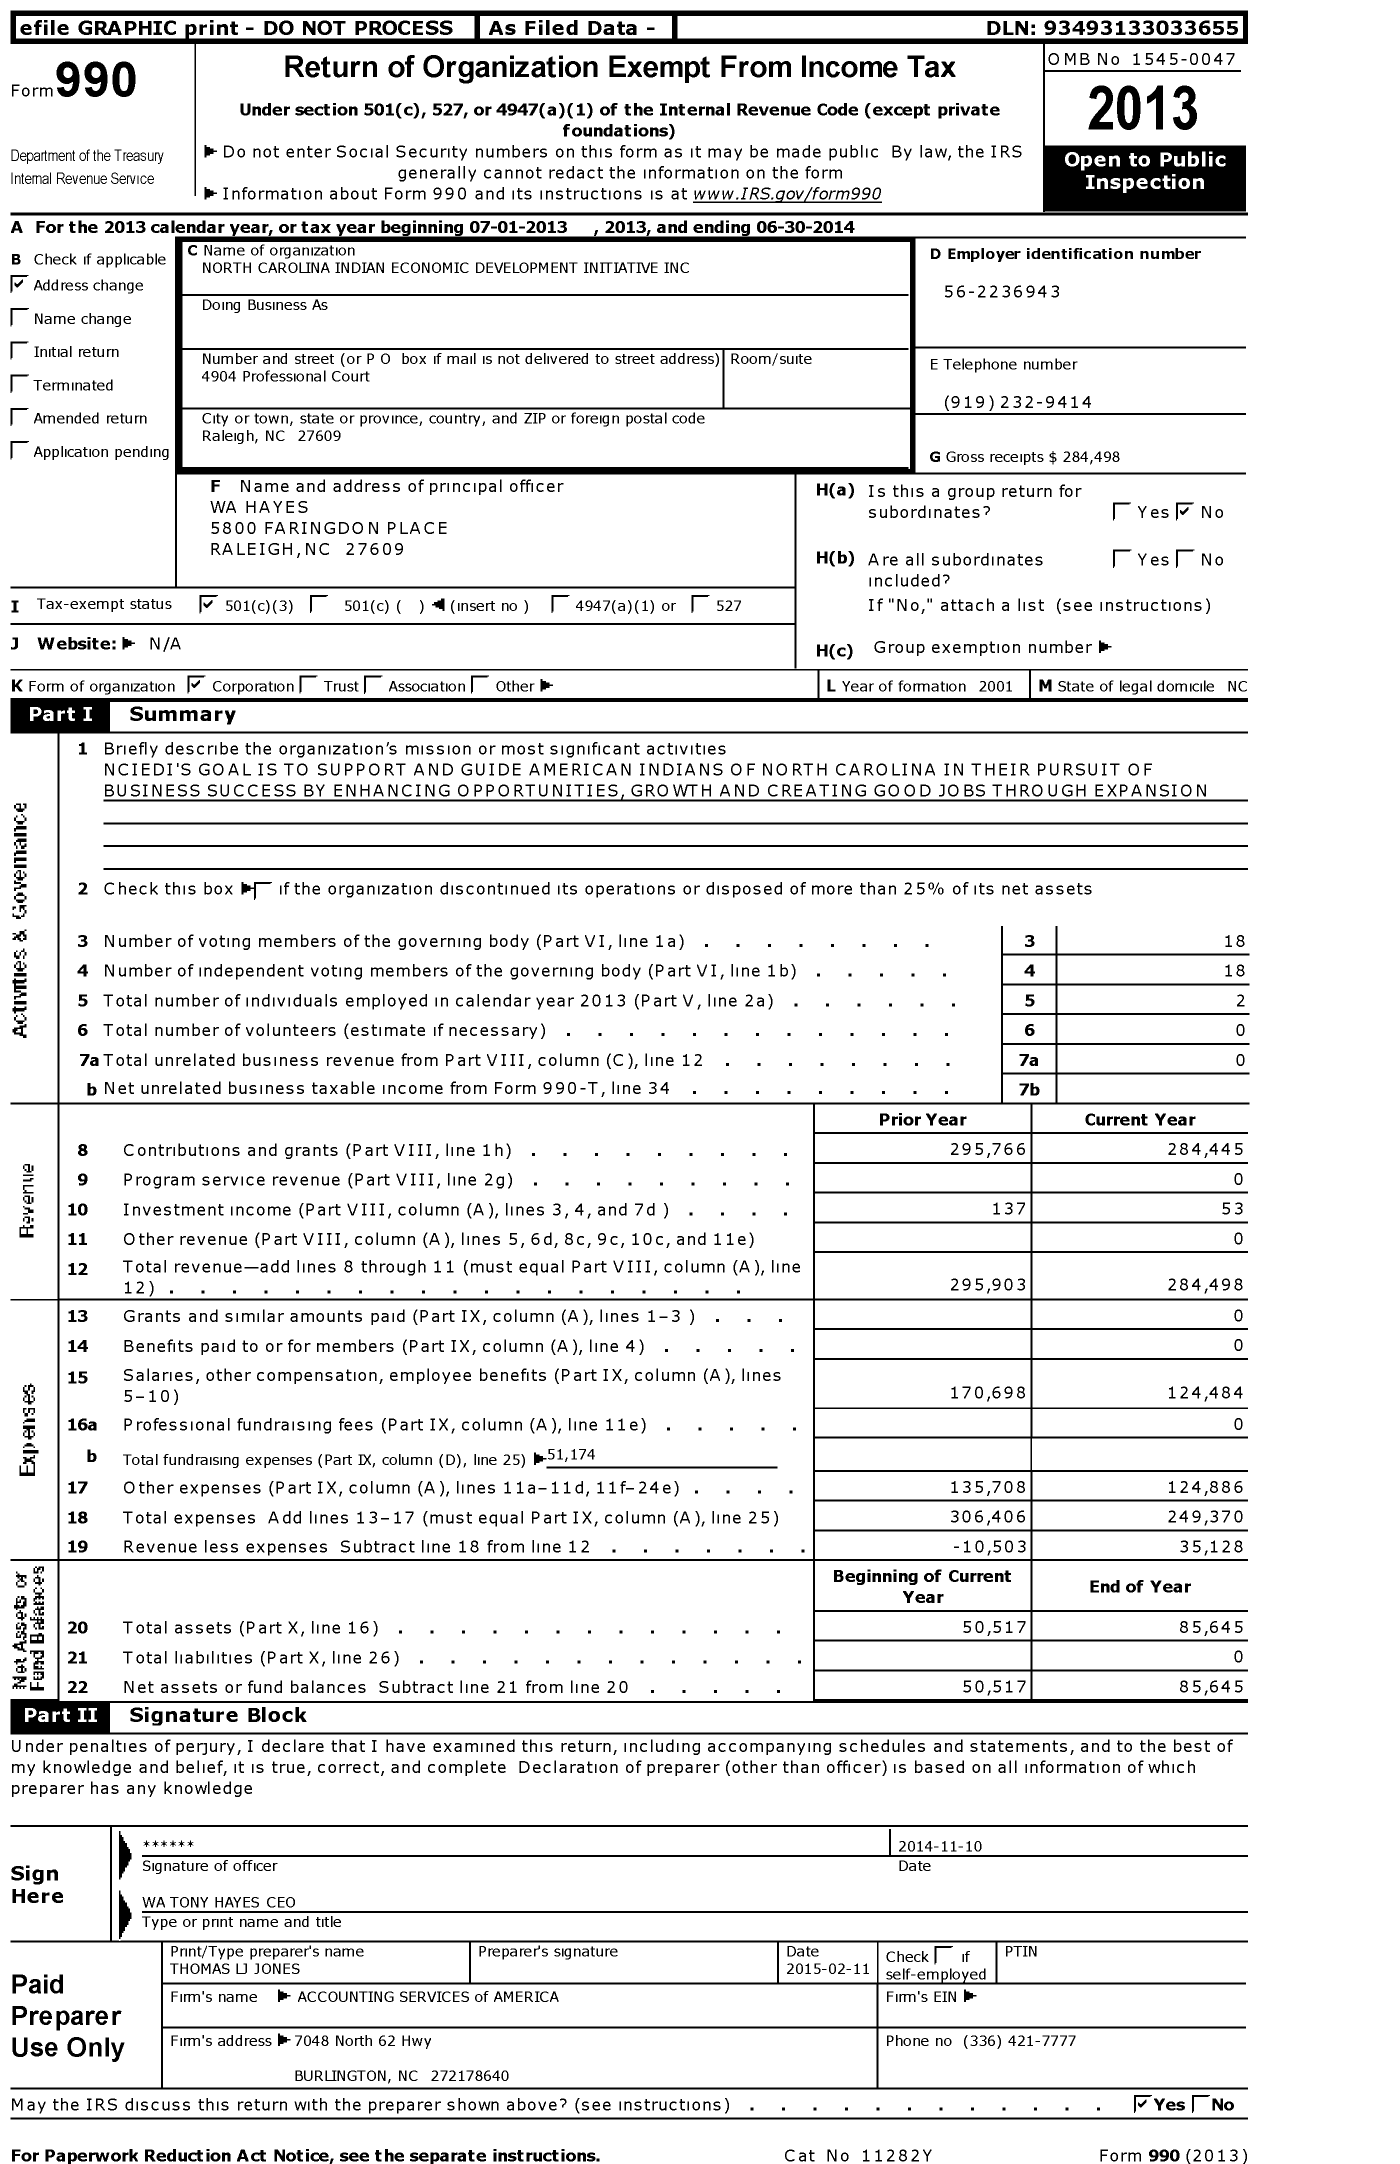 Image of first page of 2013 Form 990 for North Carolina Indian Economic Development Initiative